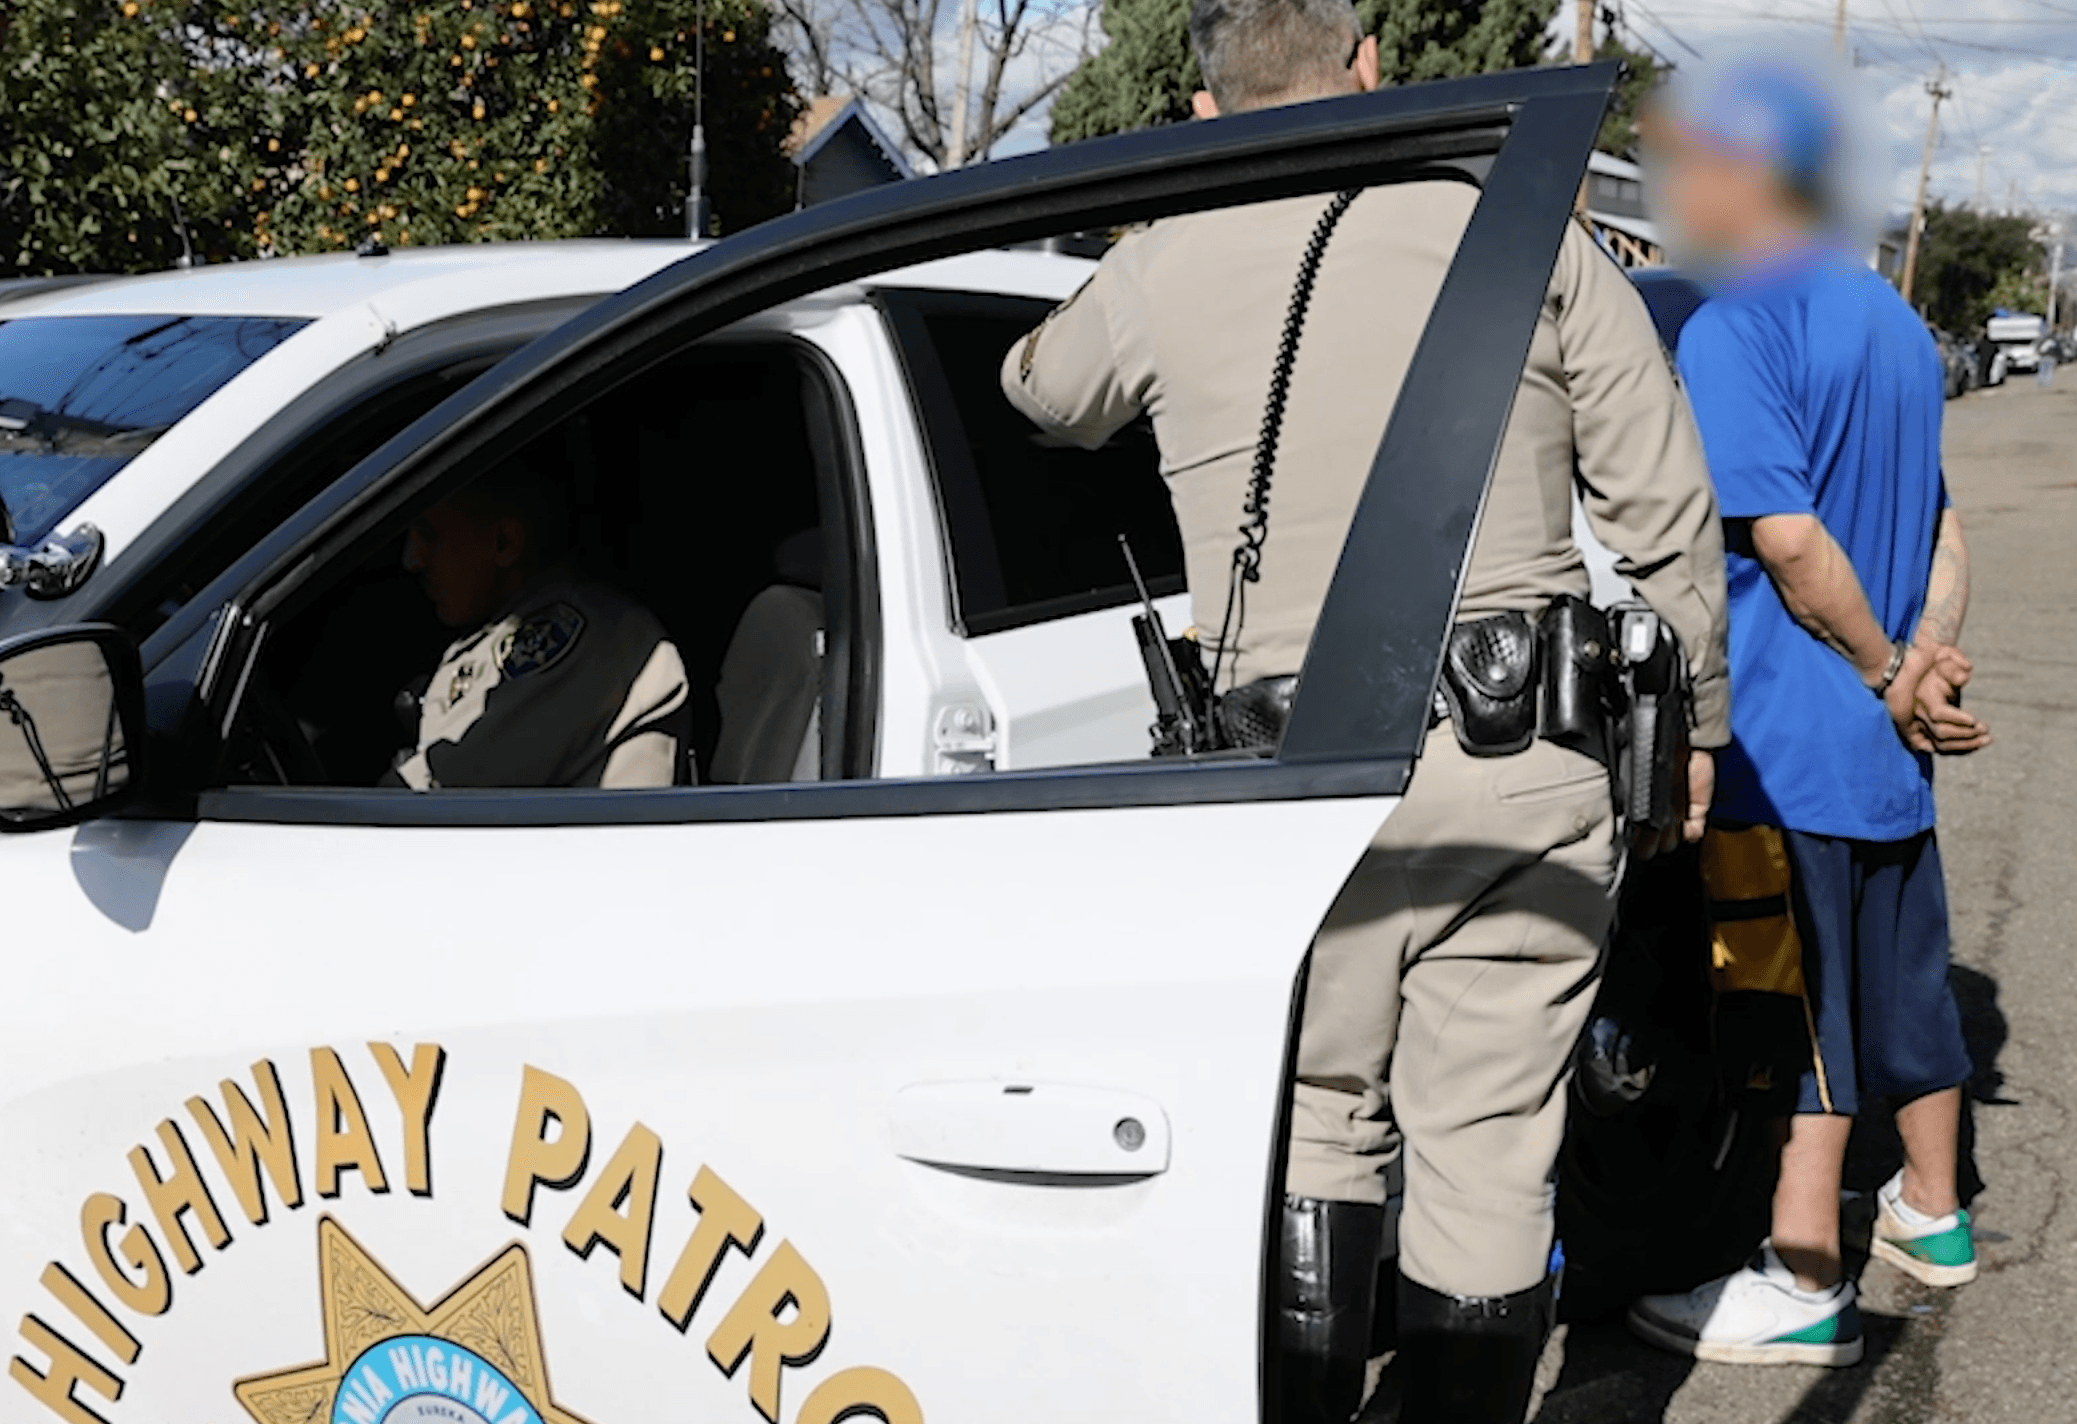 California Highway Patrol Dispatched to Oakland to Fight Crime Only Lasted 5 Days